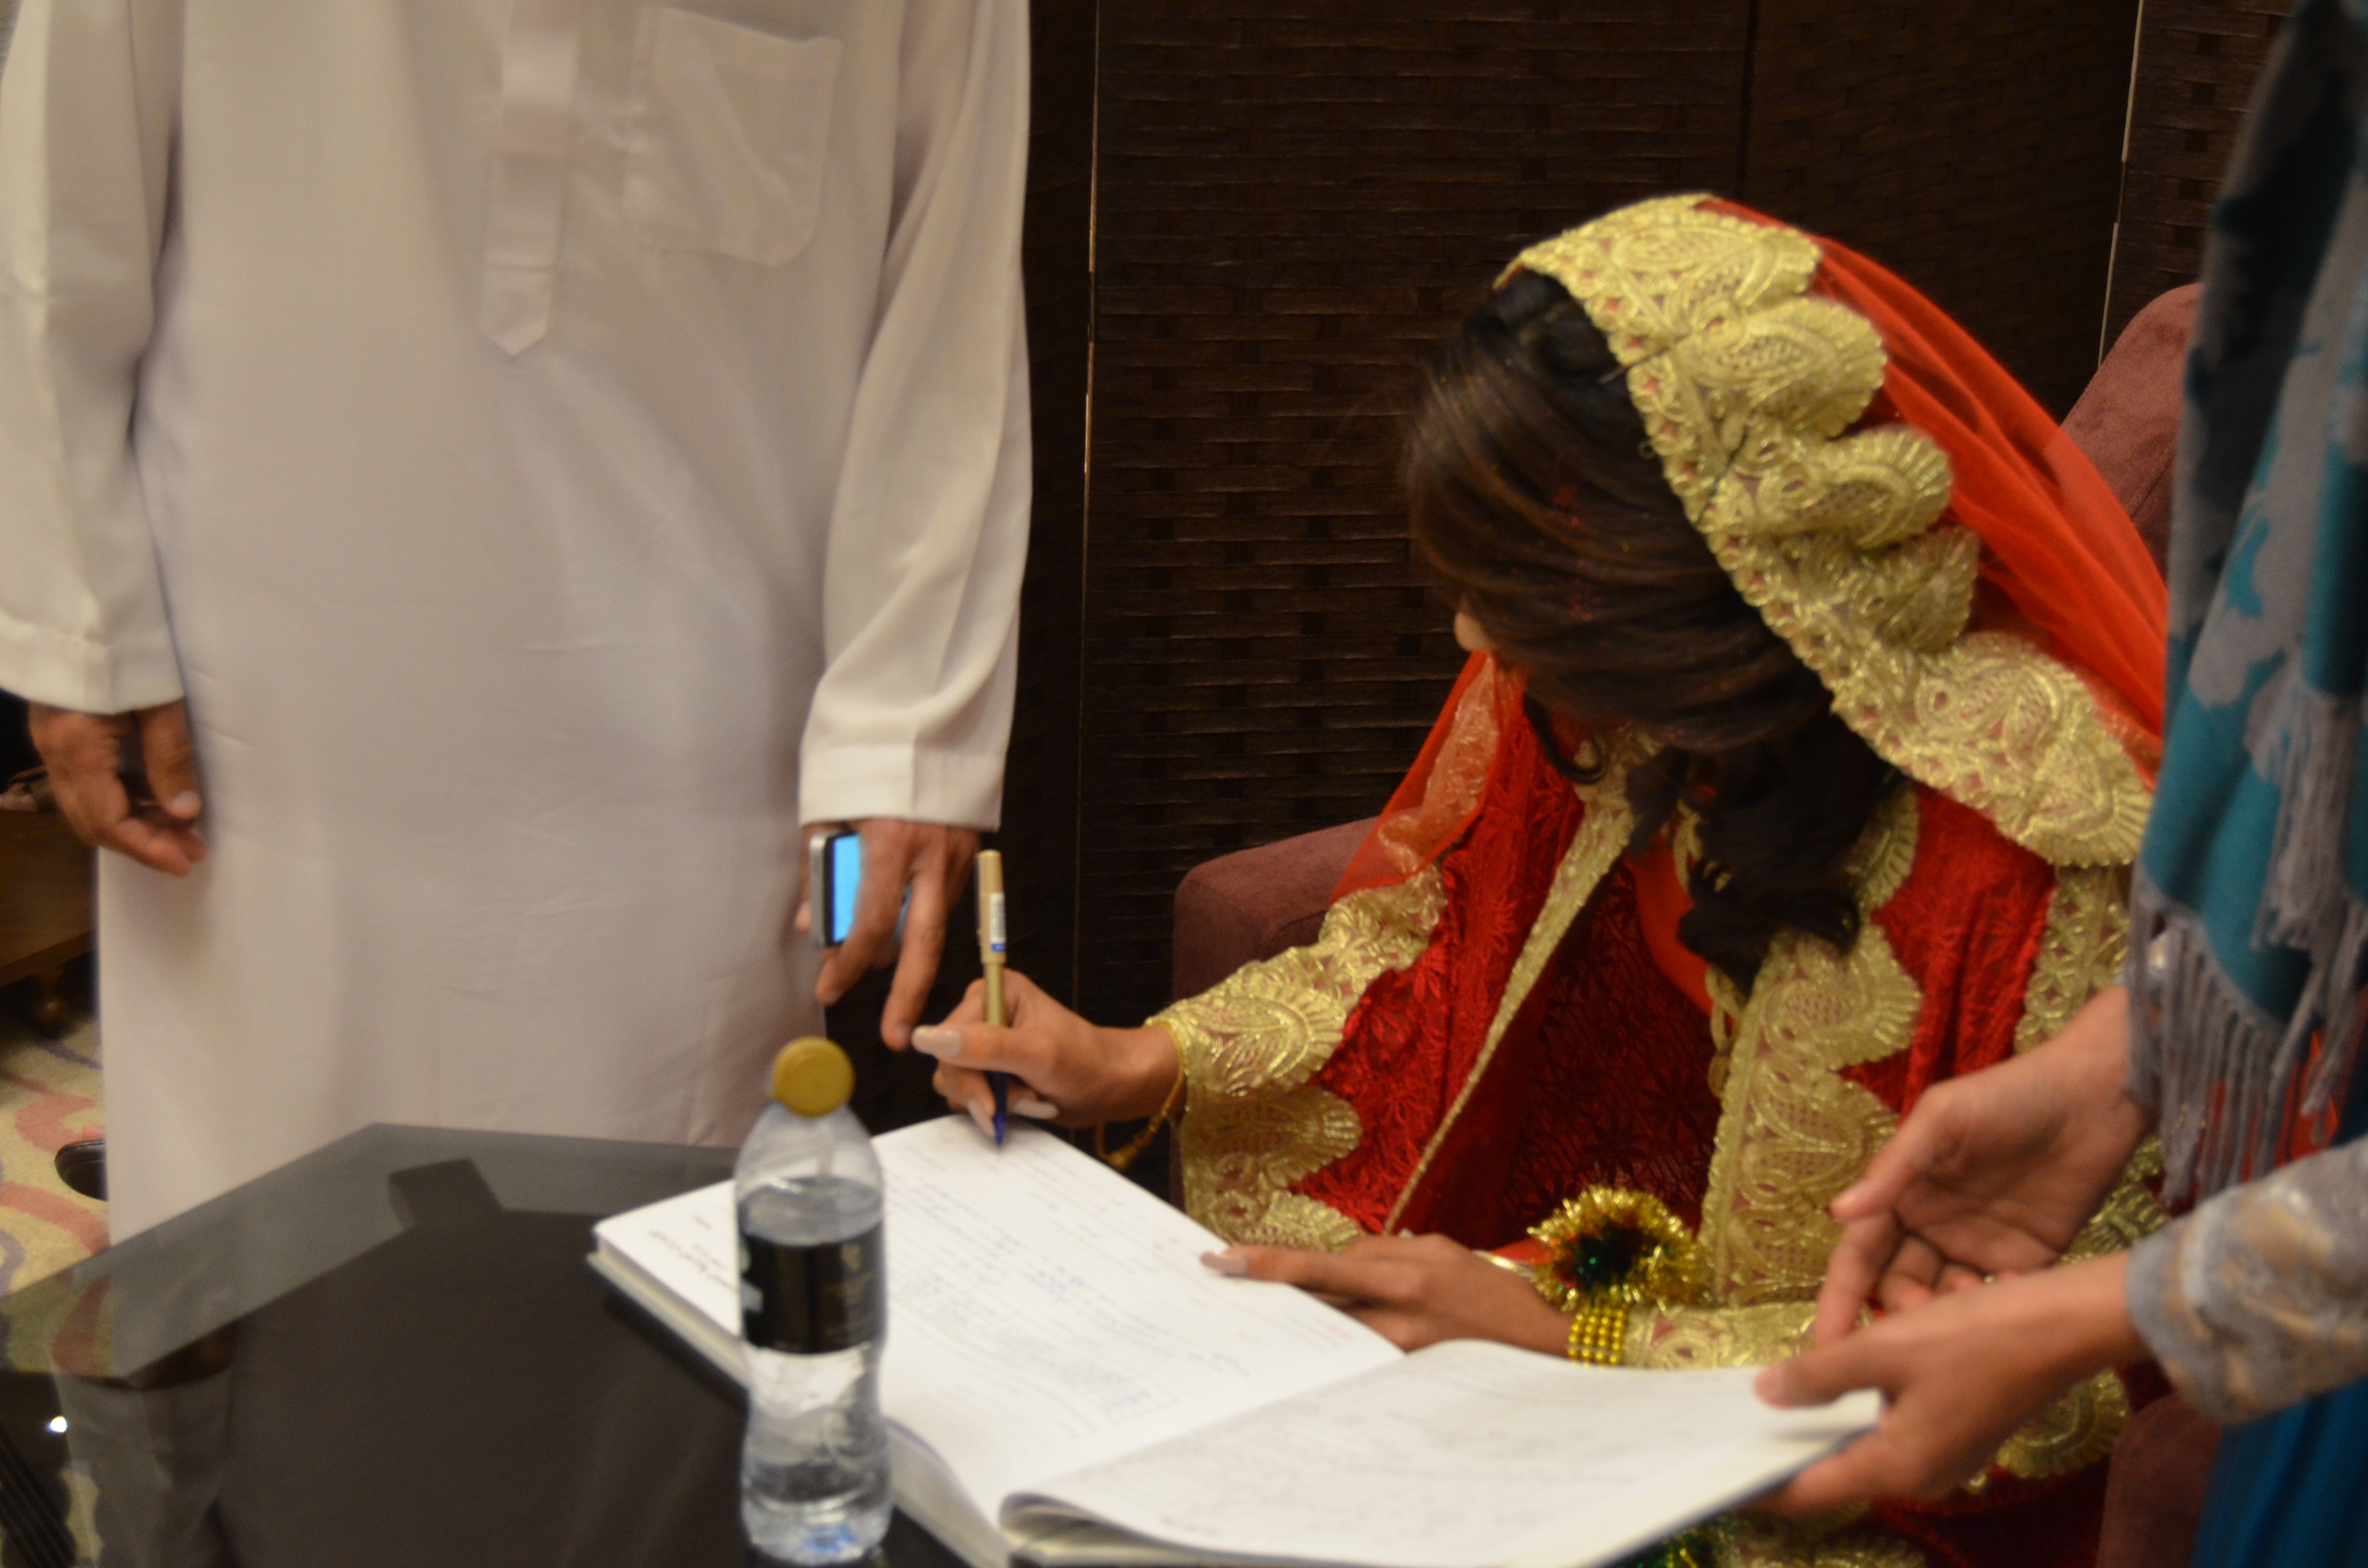 Signing the Nikkah papers